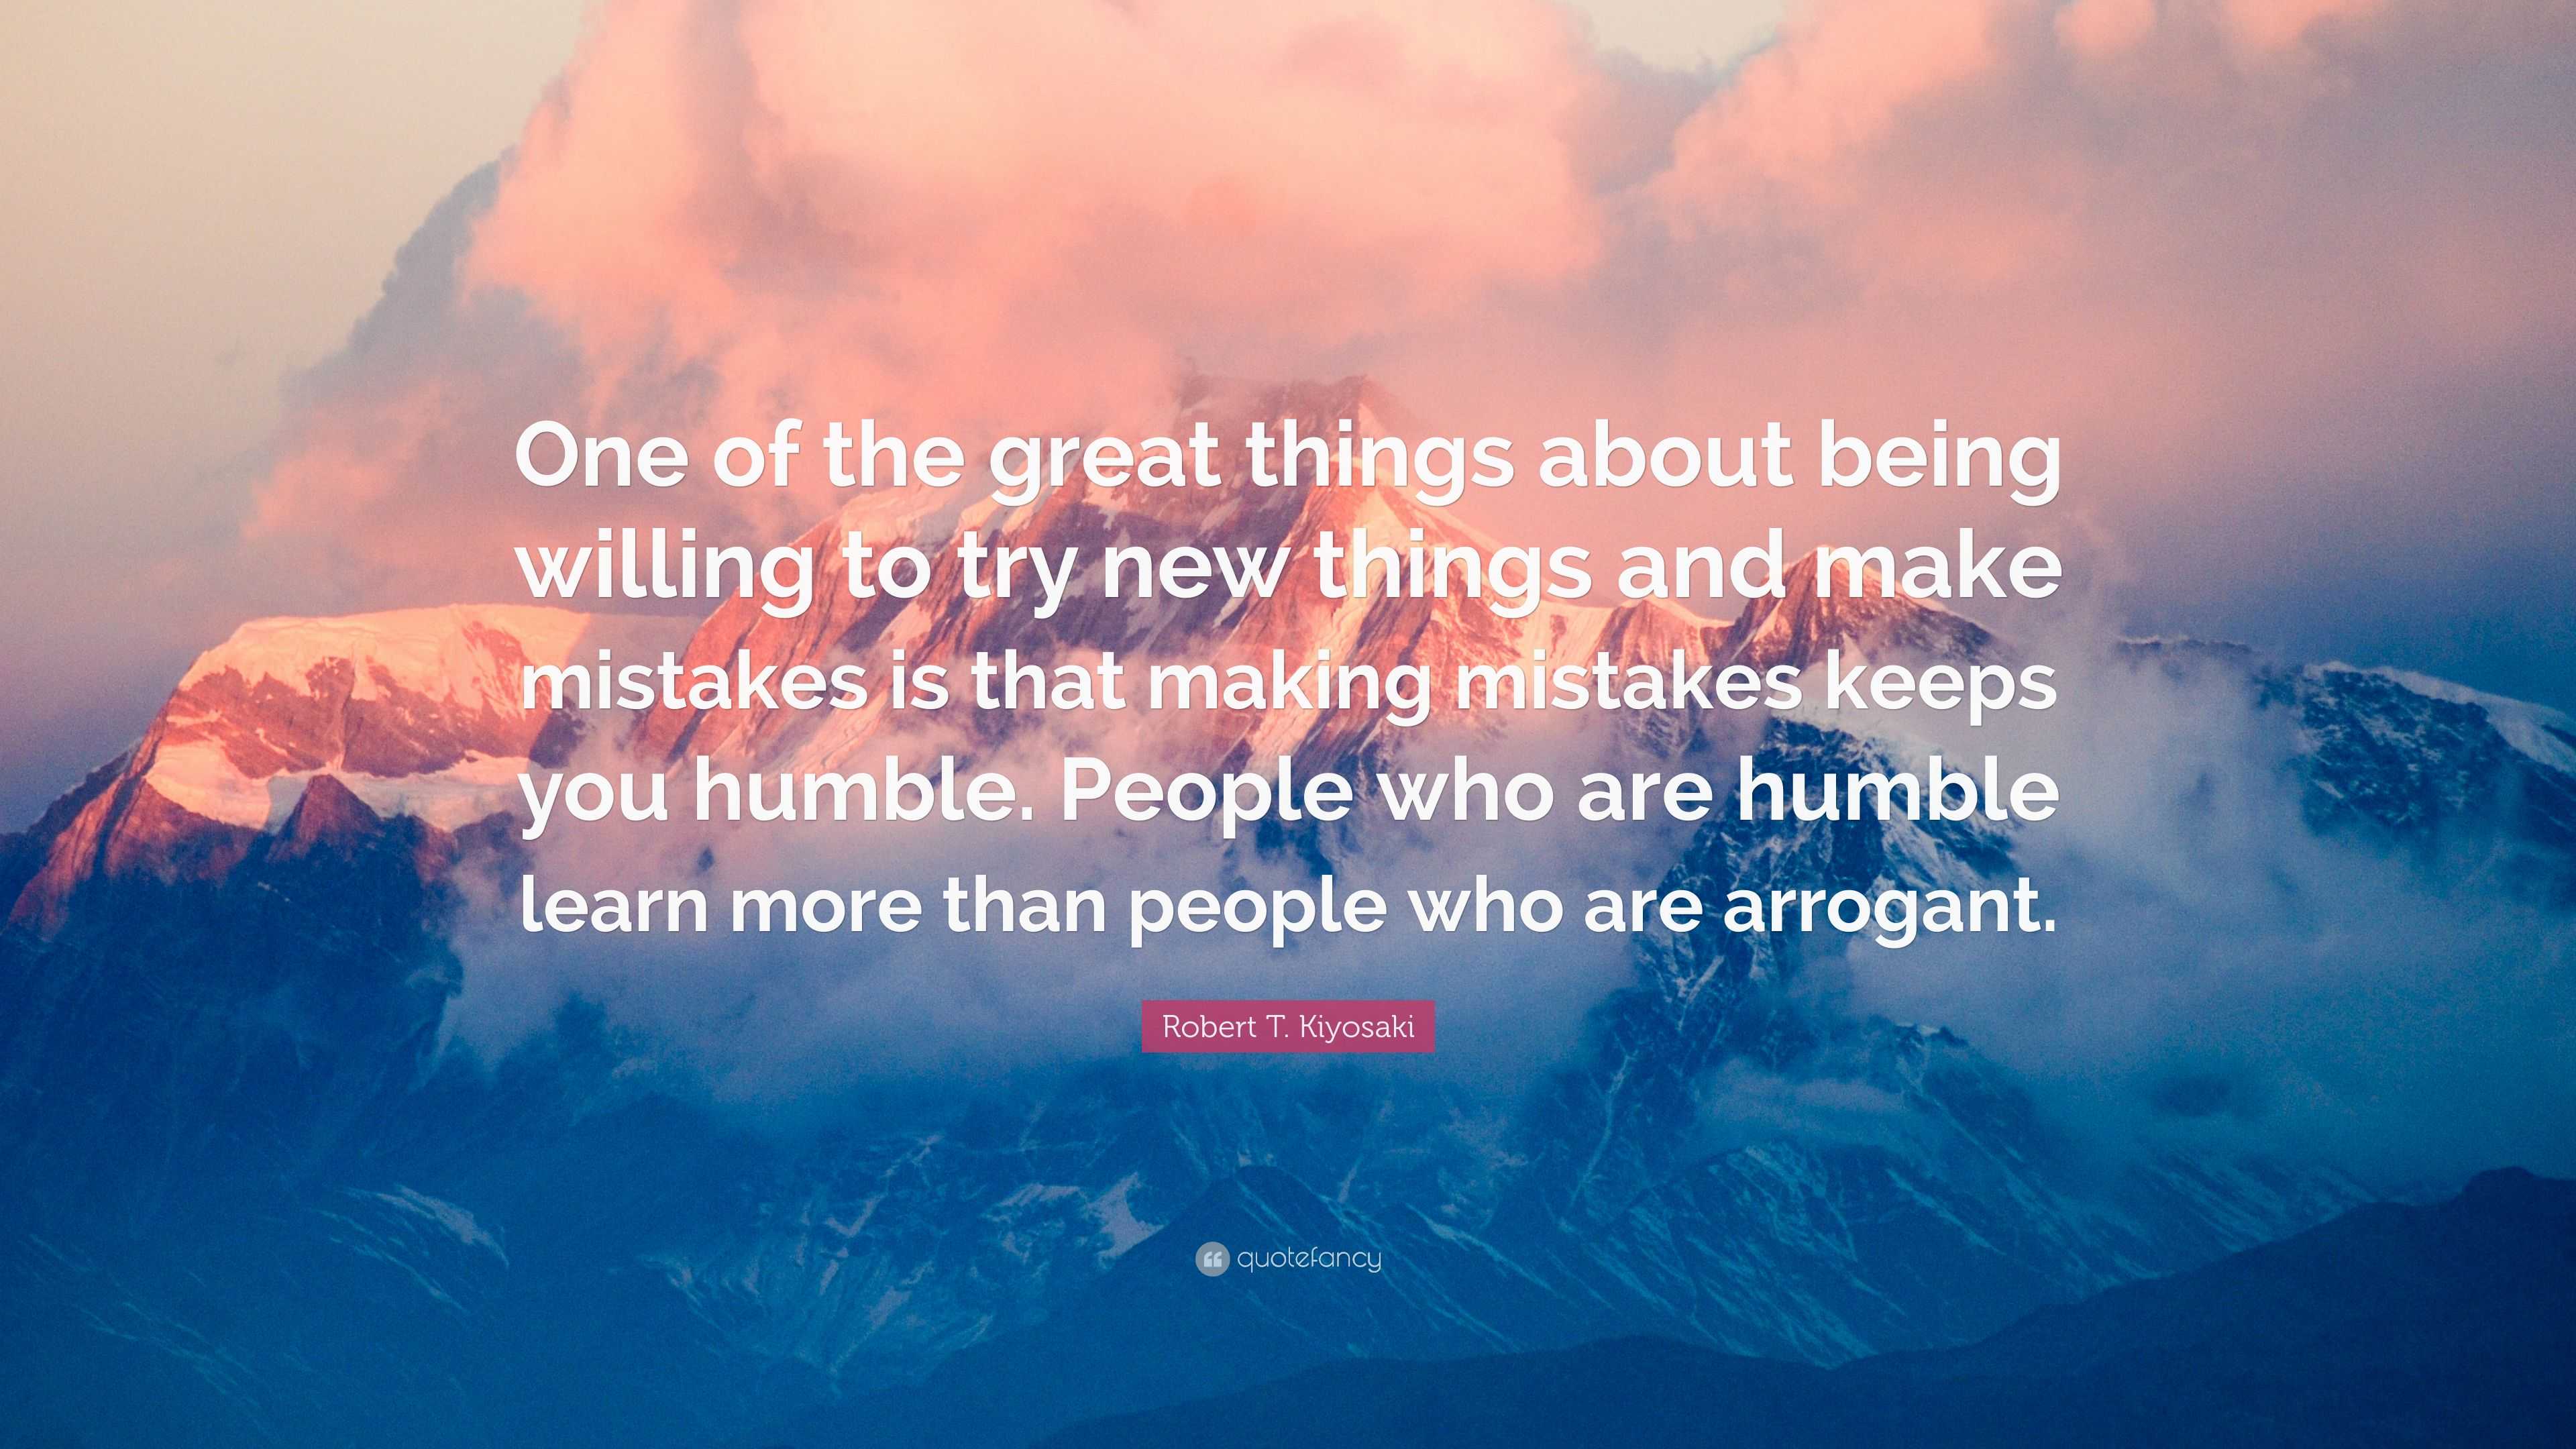 Robert T. Kiyosaki Quote: “One of the great things about being willing ...